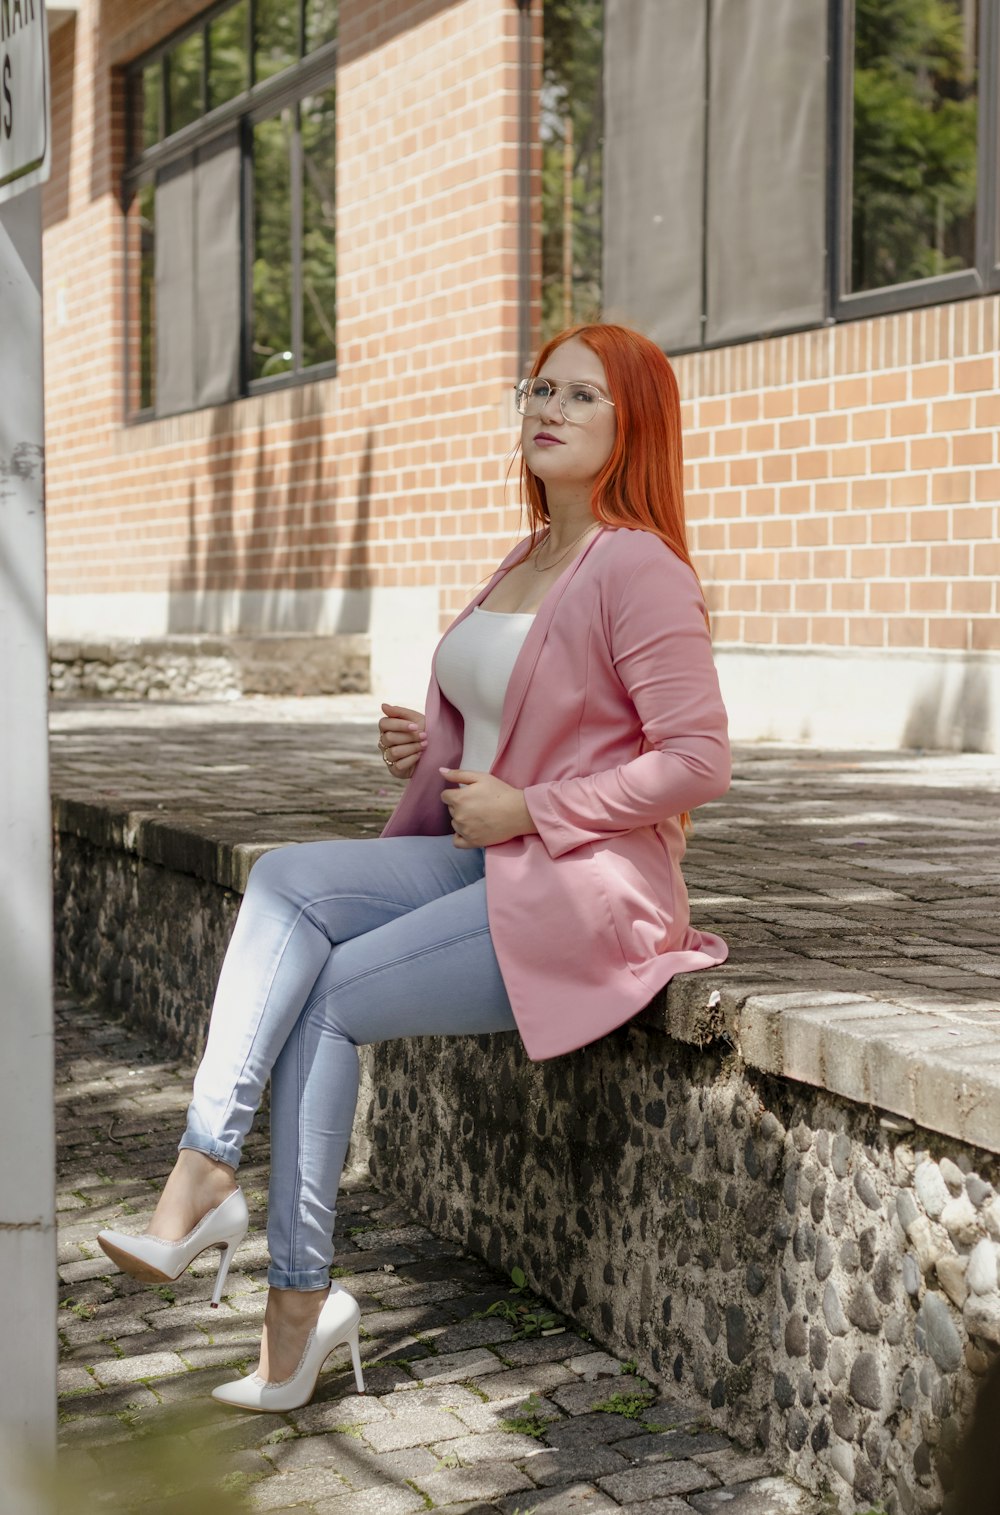 a woman with red hair is sitting on a ledge